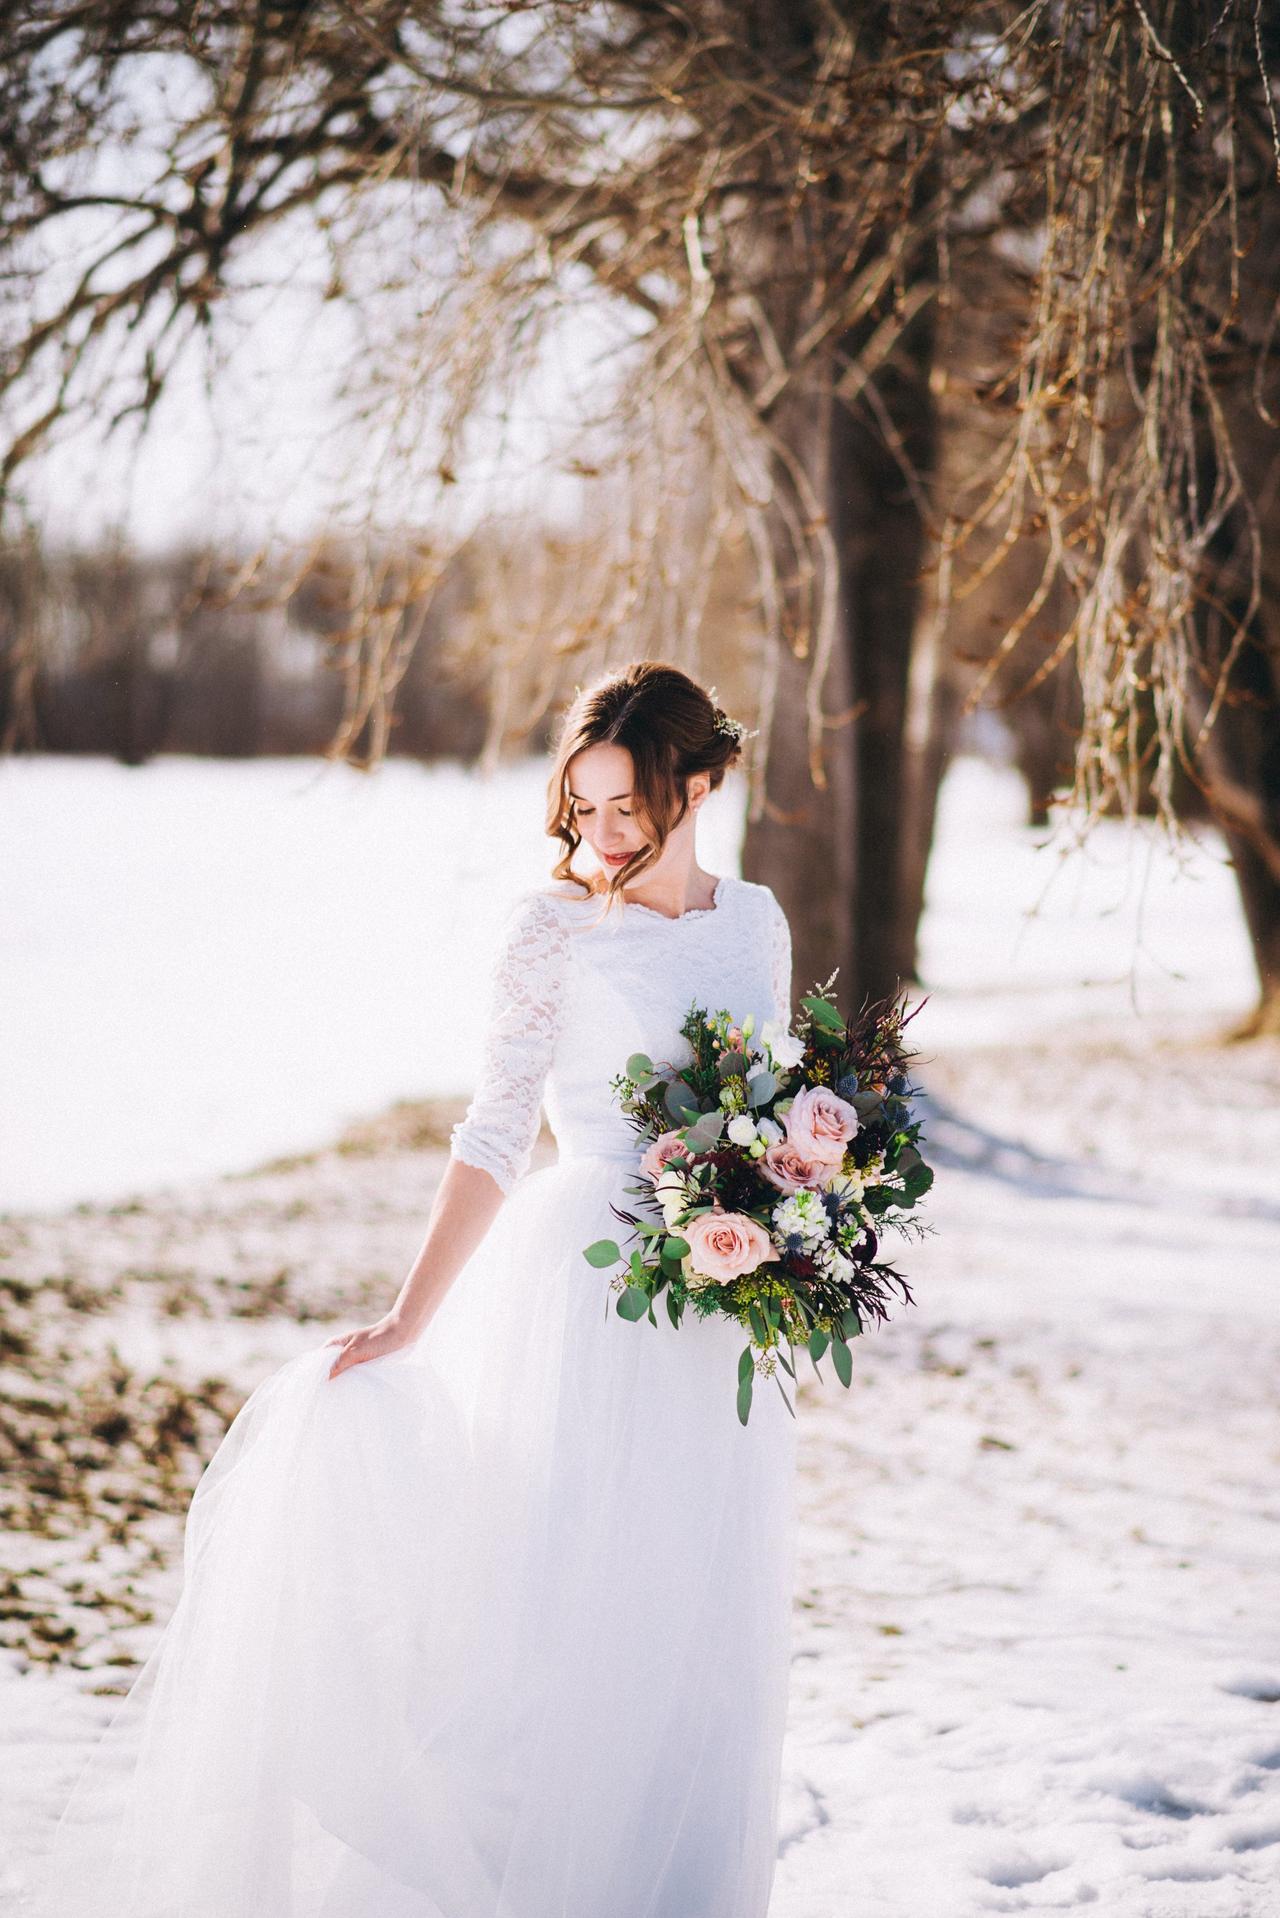 Ask the Experts: Ten Winter Wedding Dresses to Inspire your Snowy Ceremony  - Boho Wedding Blog